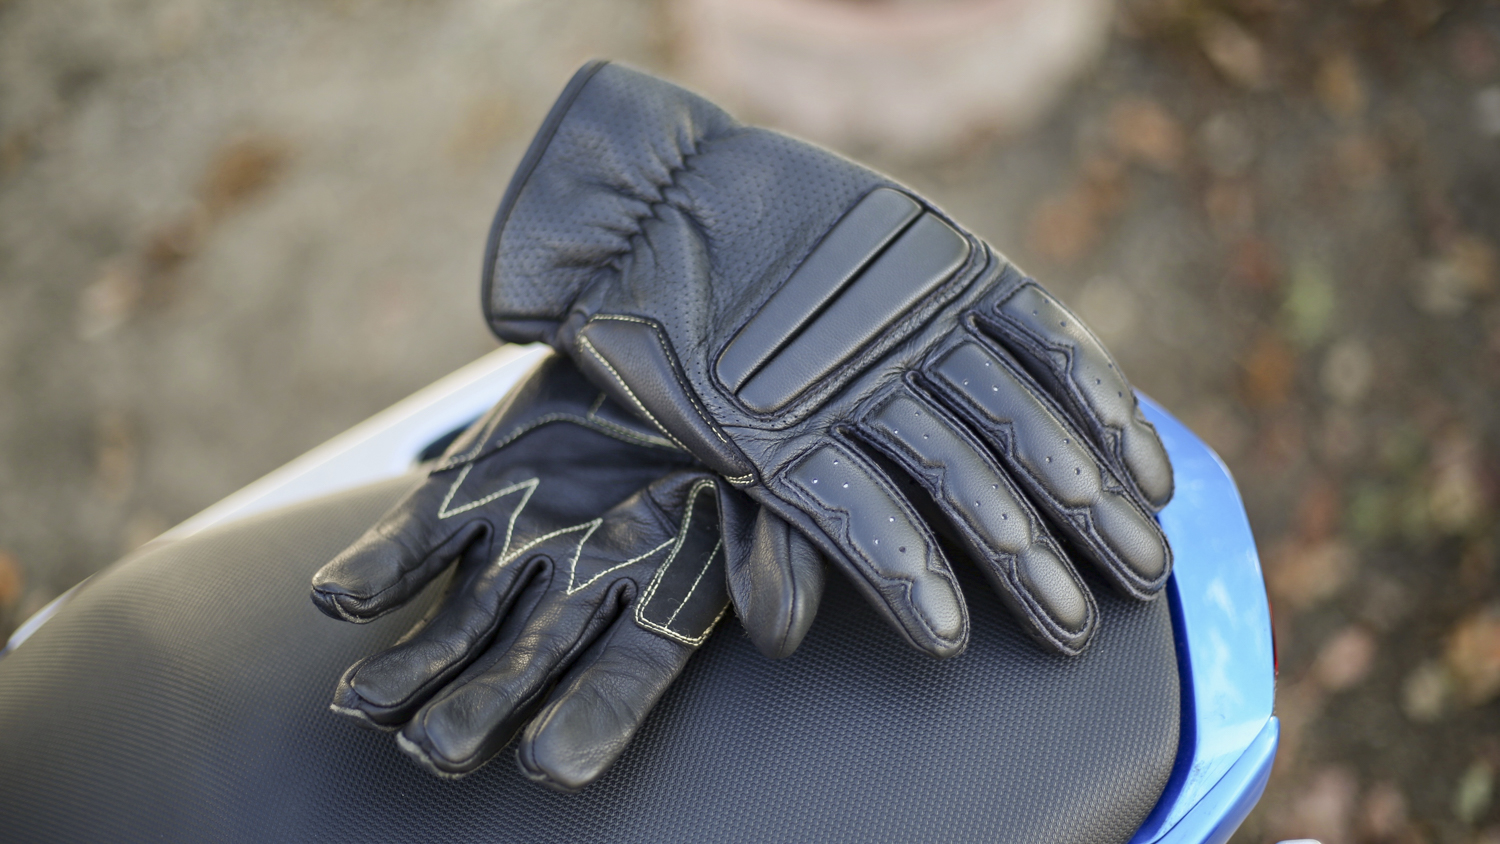 Dainese Motorcycle Gear Review